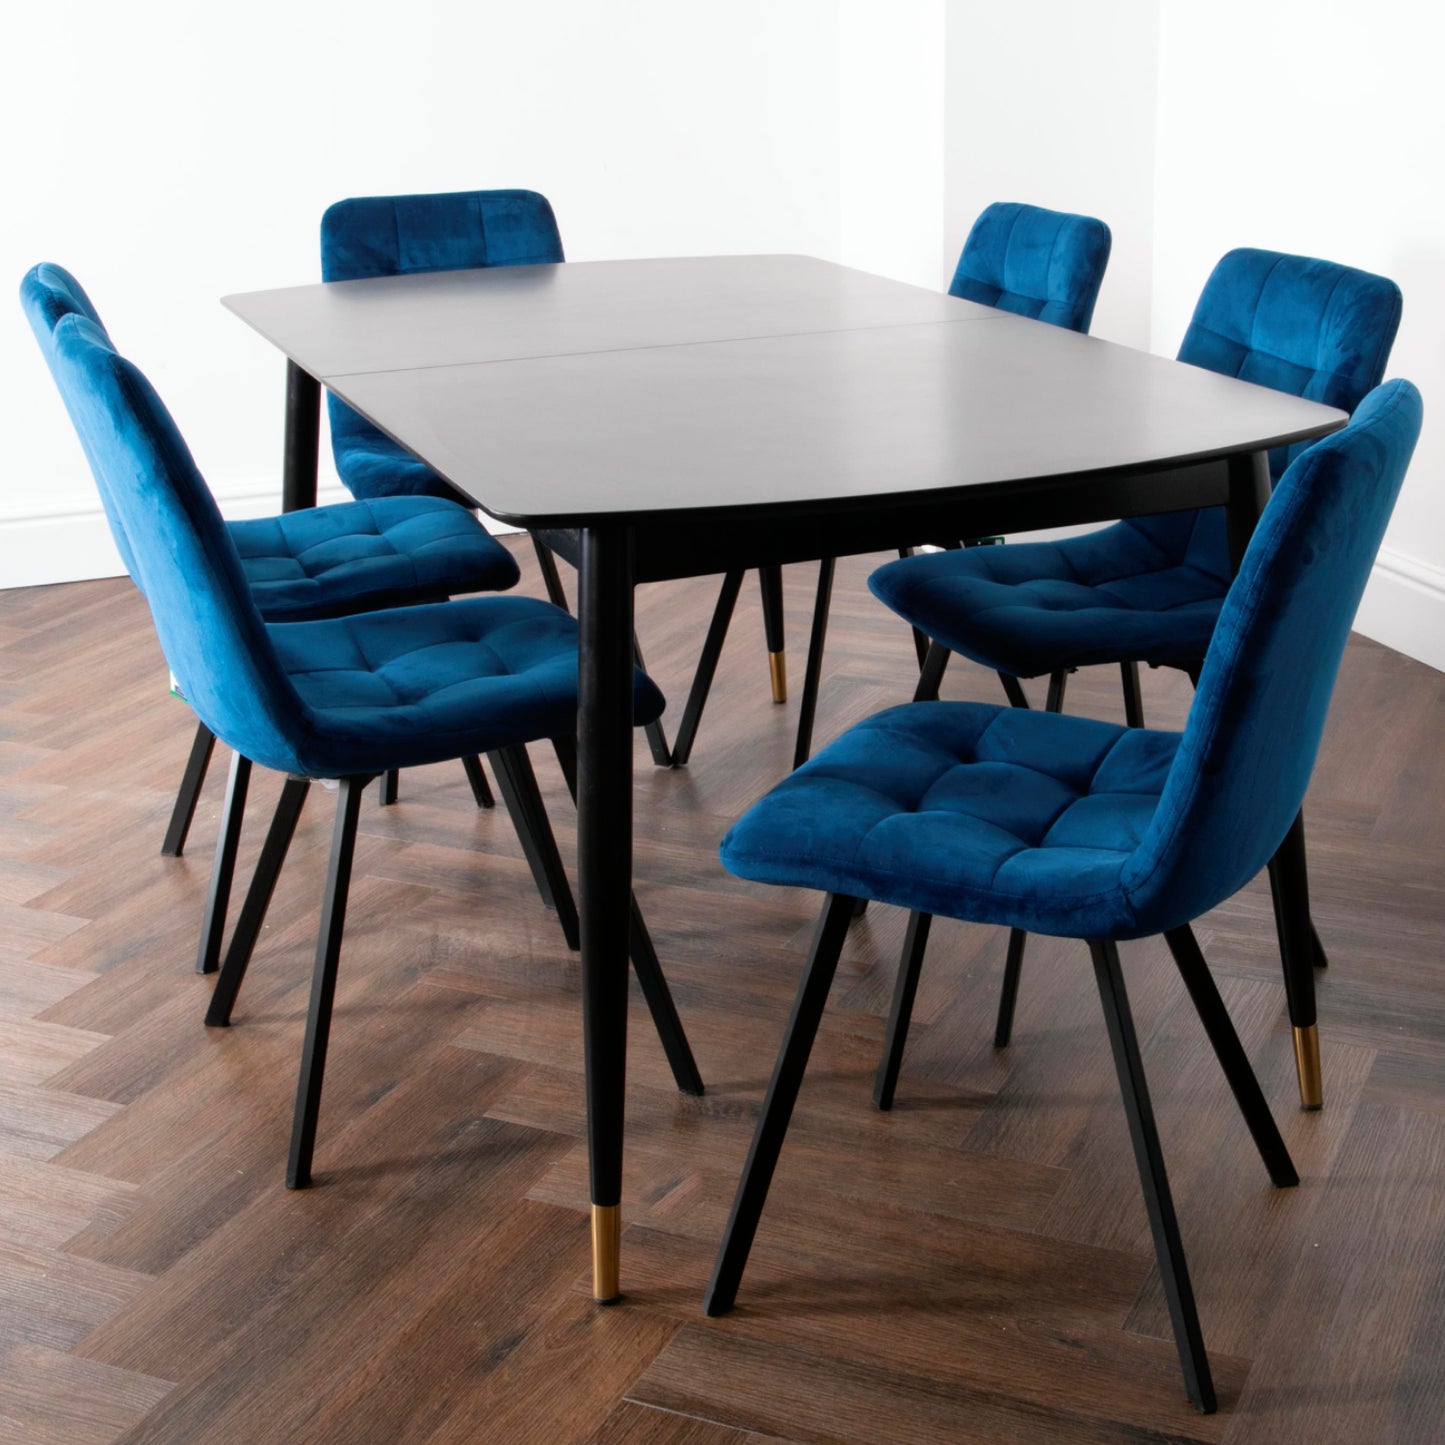 Walnut cambridge dining table with 4 chairs by Native